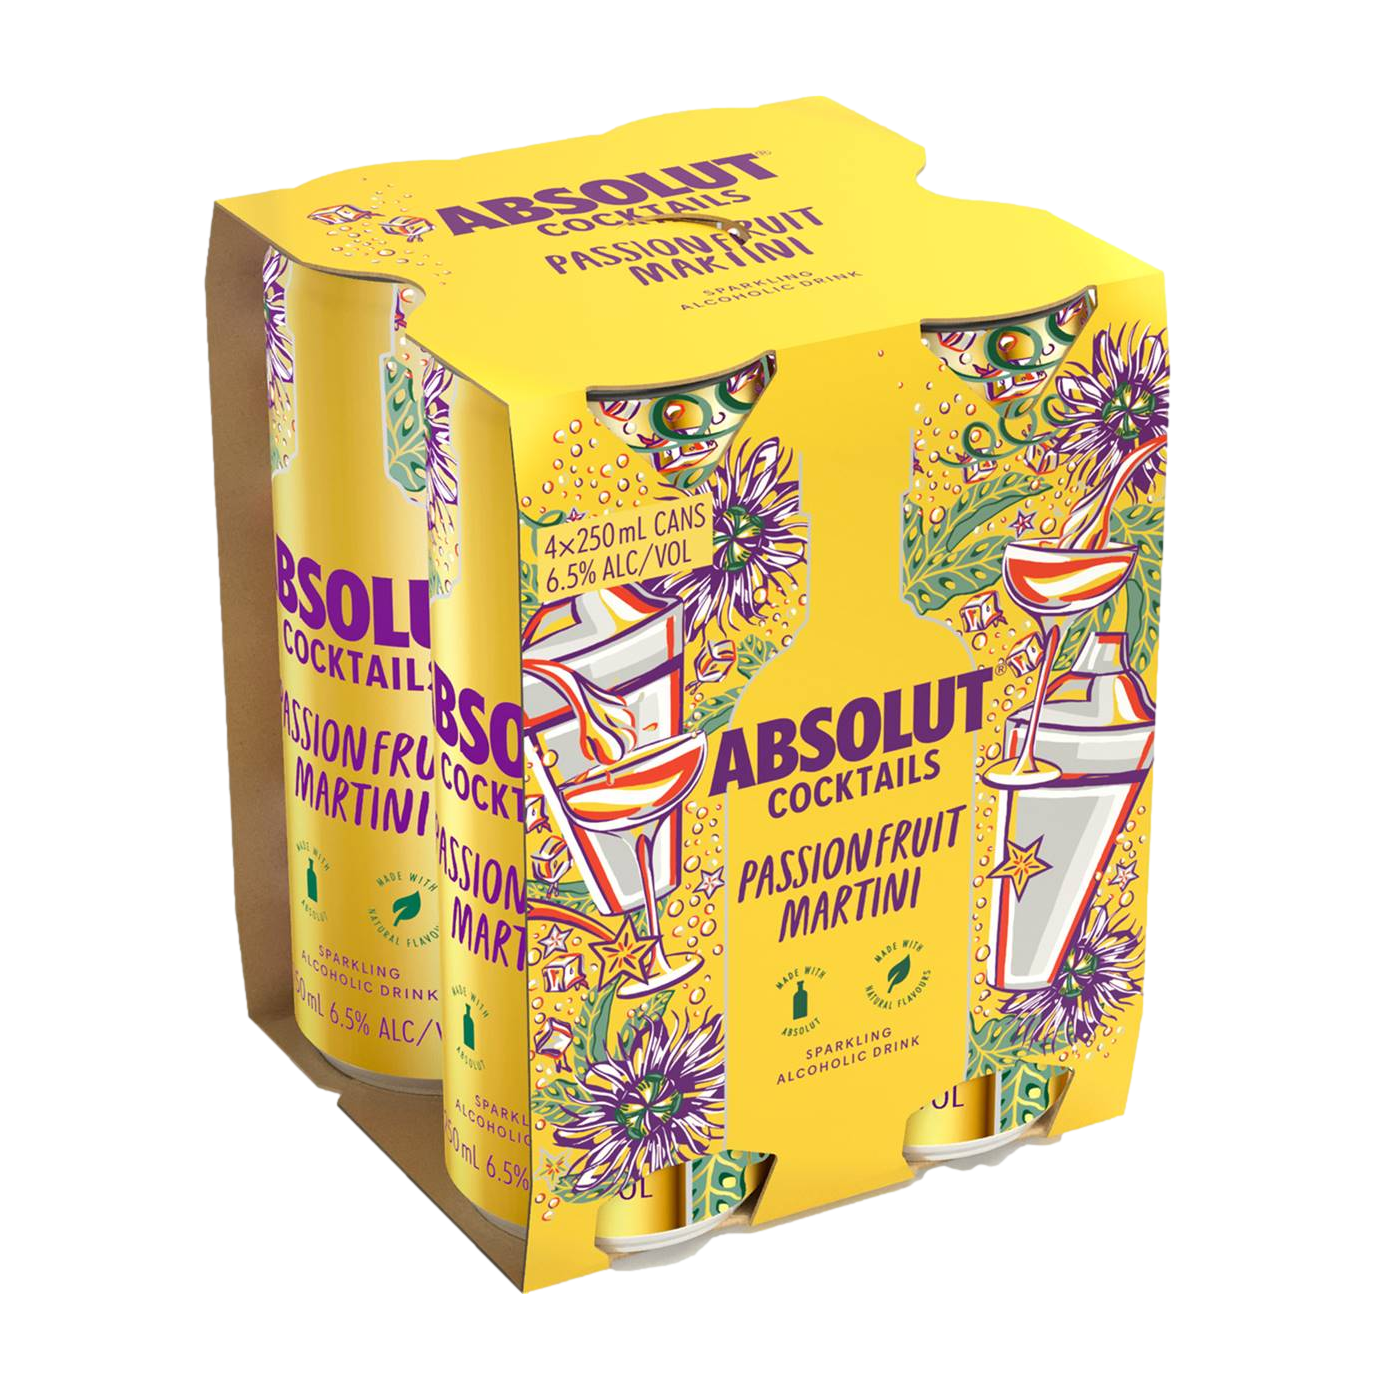 Absolut Cocktails Passionfruit Martini 6.5% 250ml Can 4 Pack